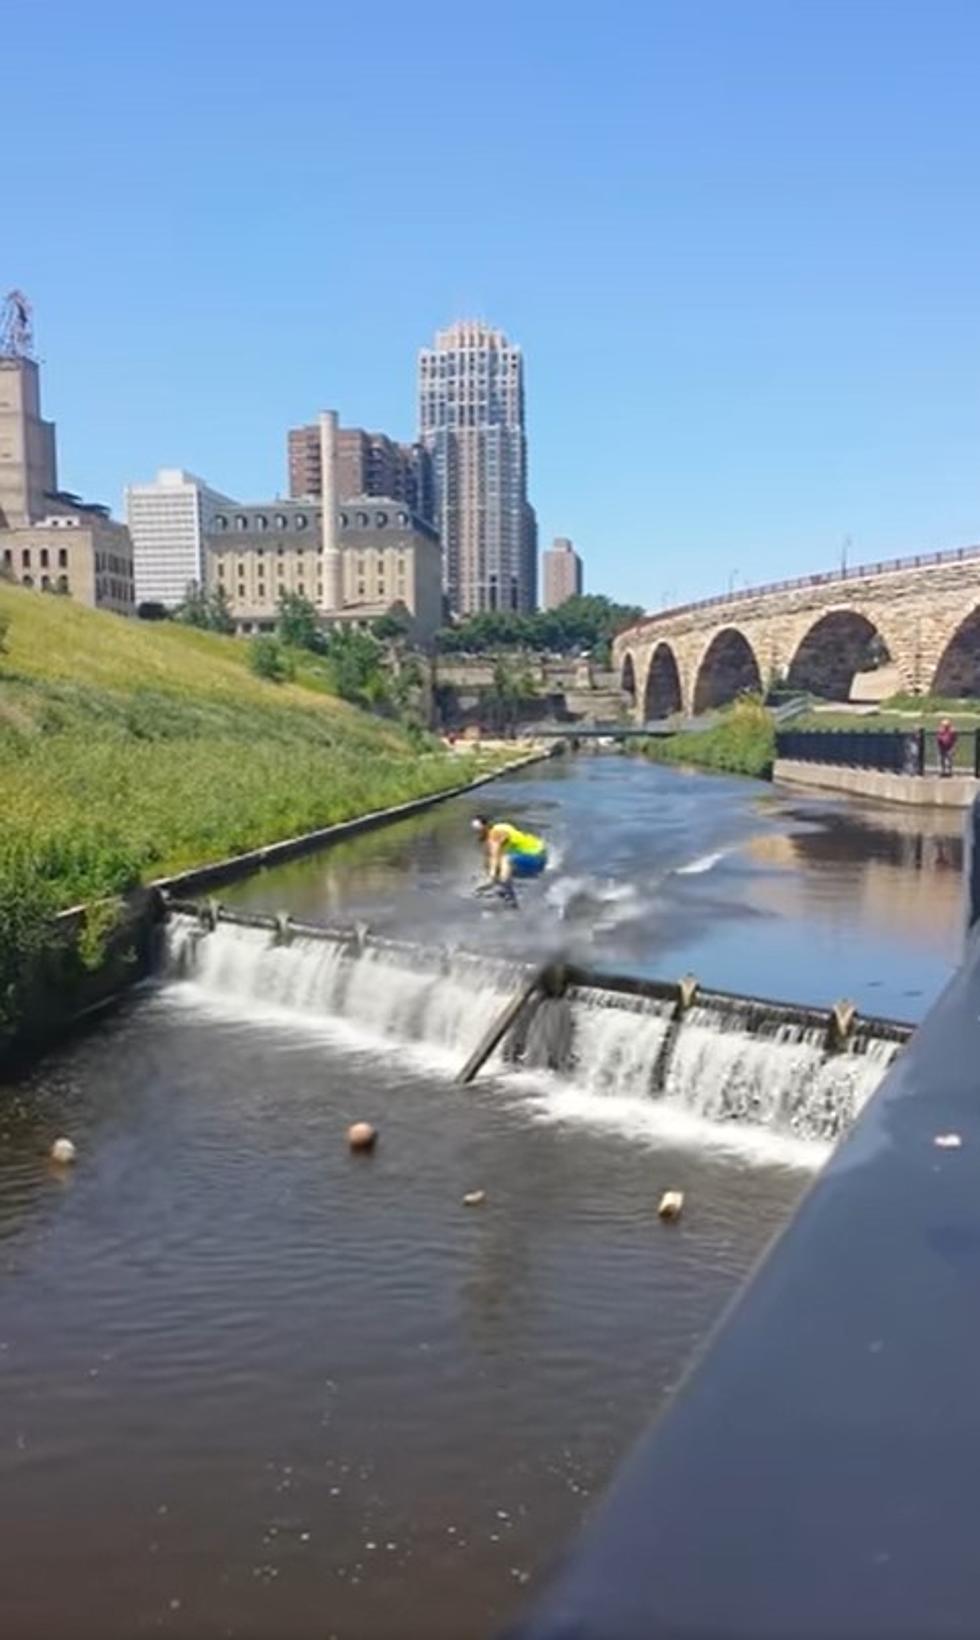 Is This Legal? Would You Dare Try ‘Surfing’ Down This Minneapolis Falls?